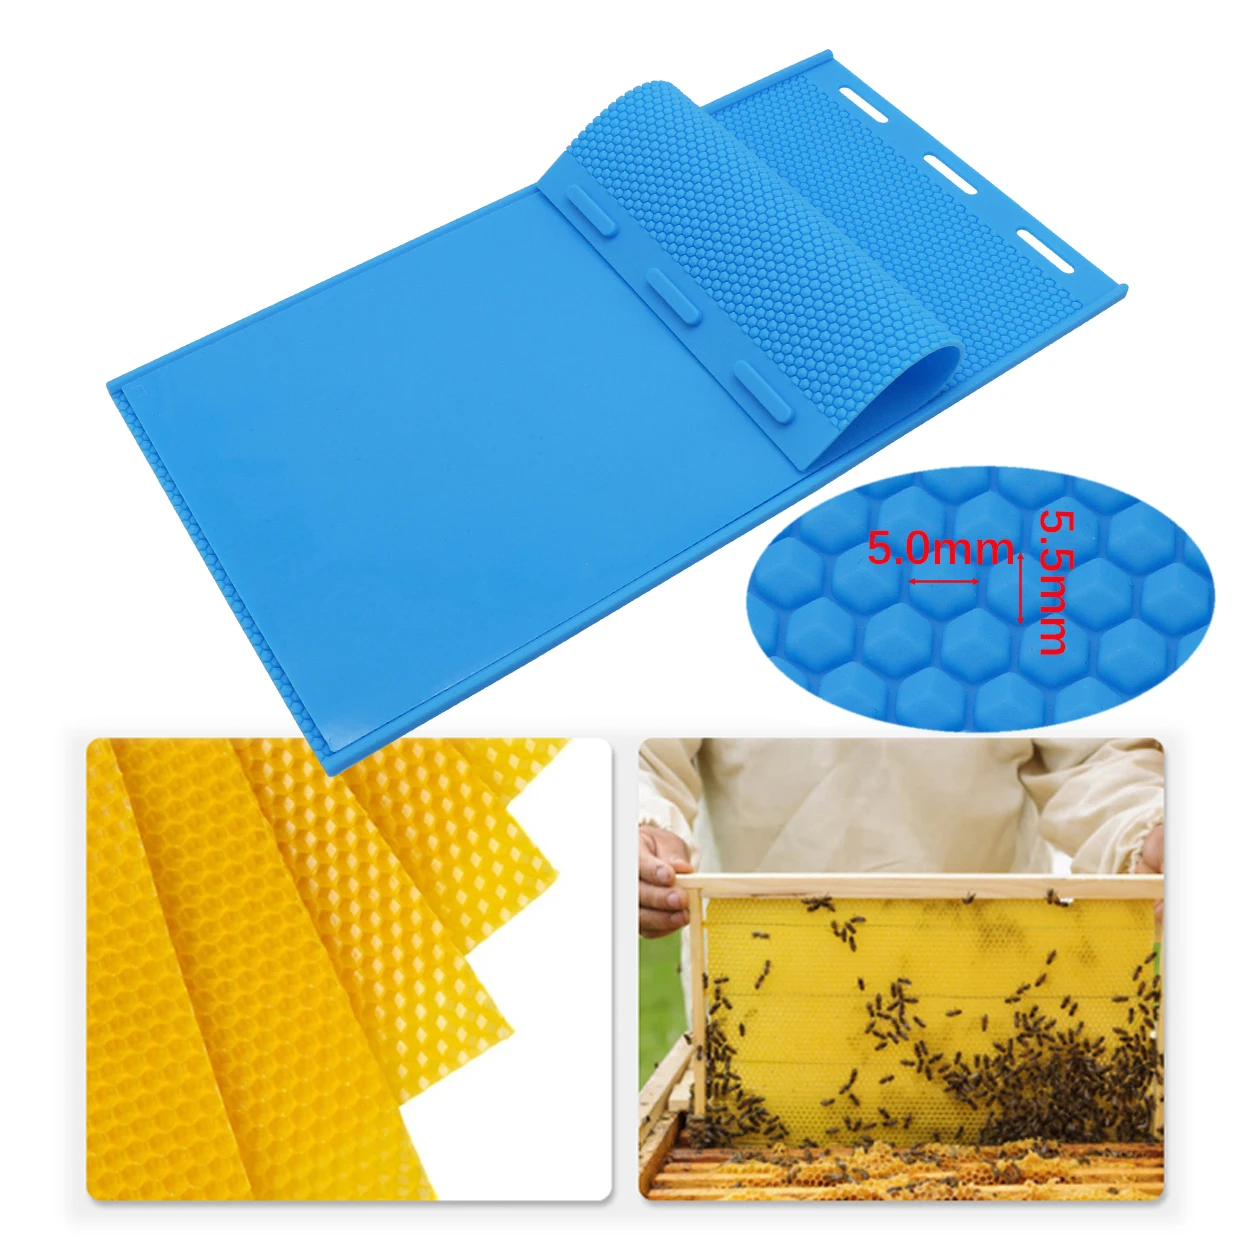 1set Apiculture Silicone Beeswax Honeycomb Mold Flexible Wax for Machine Foundation Sheets Press Embosser Wax Nest Base Making